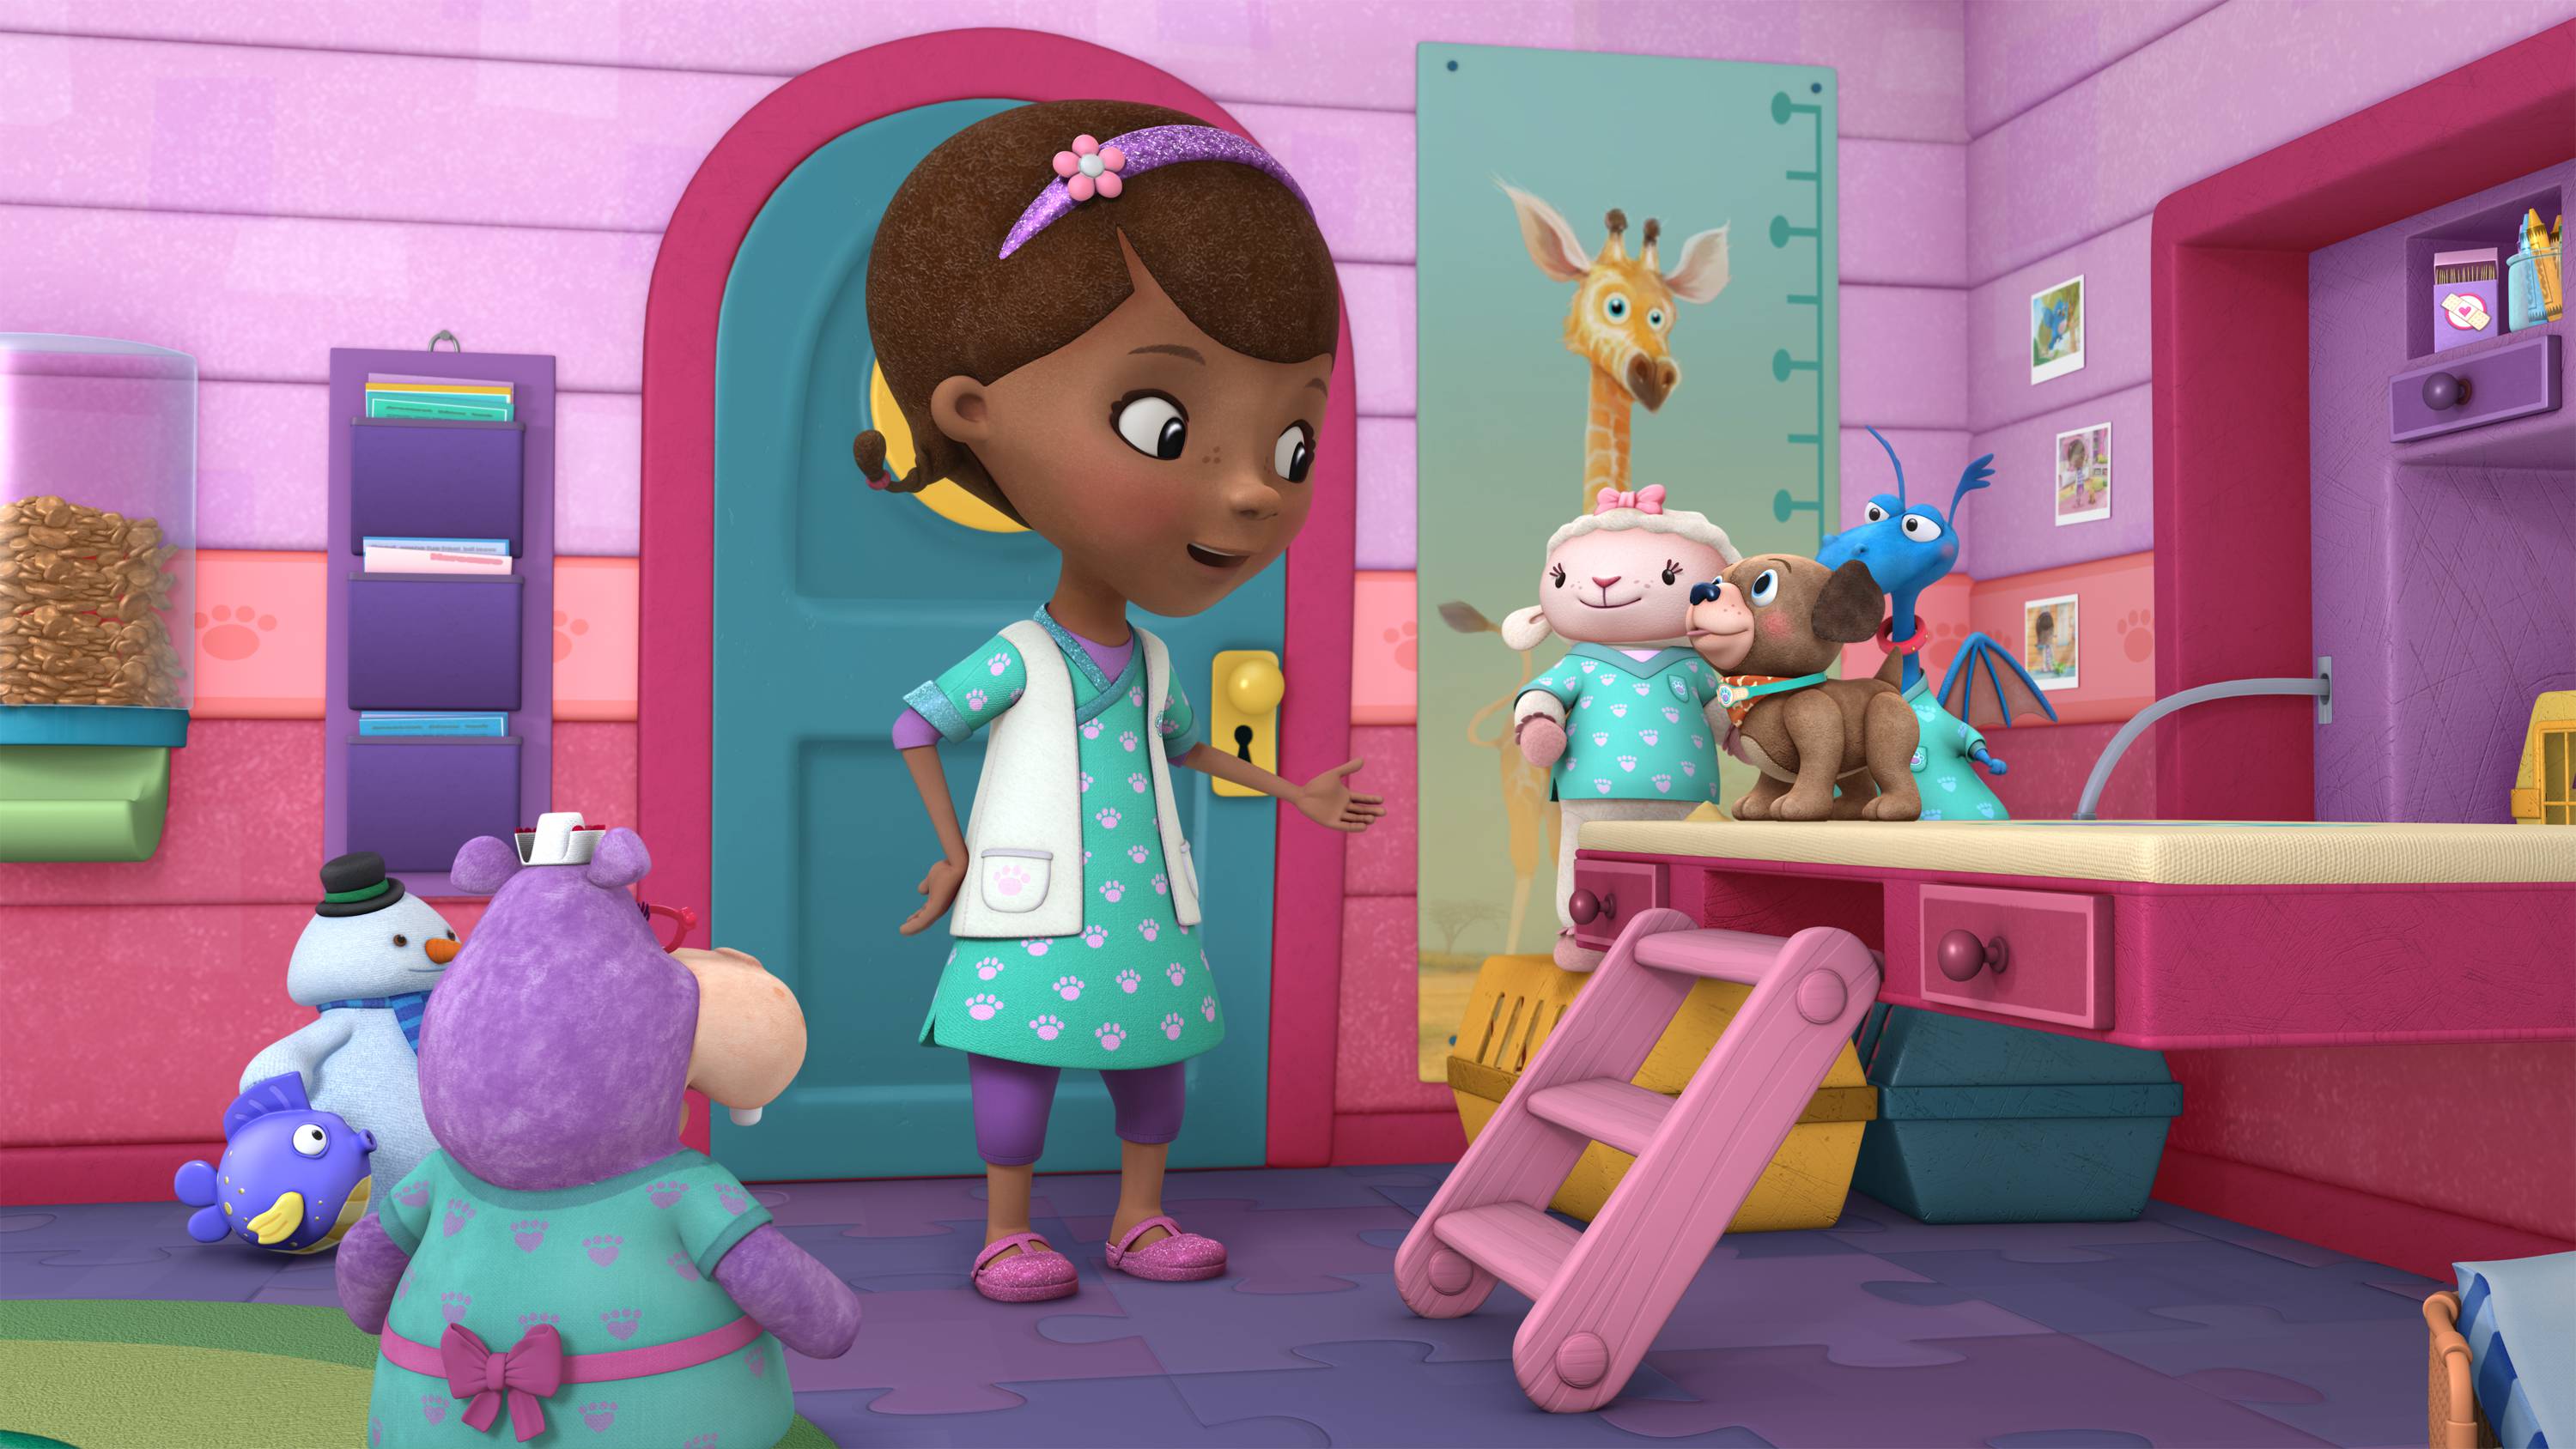 DOC MCSTUFFINS - "Fetchin' Findo" - Doc McStuffins opens a new veterinary practice in her backyard clinic where she treats stuffed animals and toys -- in a "Doc McStuffins" programming event for kids age 2-7 that will highlight care and responsibility for pets. The multi-episode story arc, "Doc McStuffins: Pet Vet," presented in collaboration with the ASPCA (The American Society for the Prevention of Cruelty to Animals(r)), Solid Gold Holistic Pet Food and Nationwide, begins FRIDAY, AUGUST 14 (9:00-10:00 a.m., ET/PT) on Disney Channel and WATCH Disney Junior. Additional pet-themed episodes of "Doc McStuffins" will roll out on Disney Channel, Disney Junior and WATCH Disney Junior. (Disney Junior) SQUEAKERS, CHILLY, HALLIE, DOC, LAMBY, FINDO, STUFFY